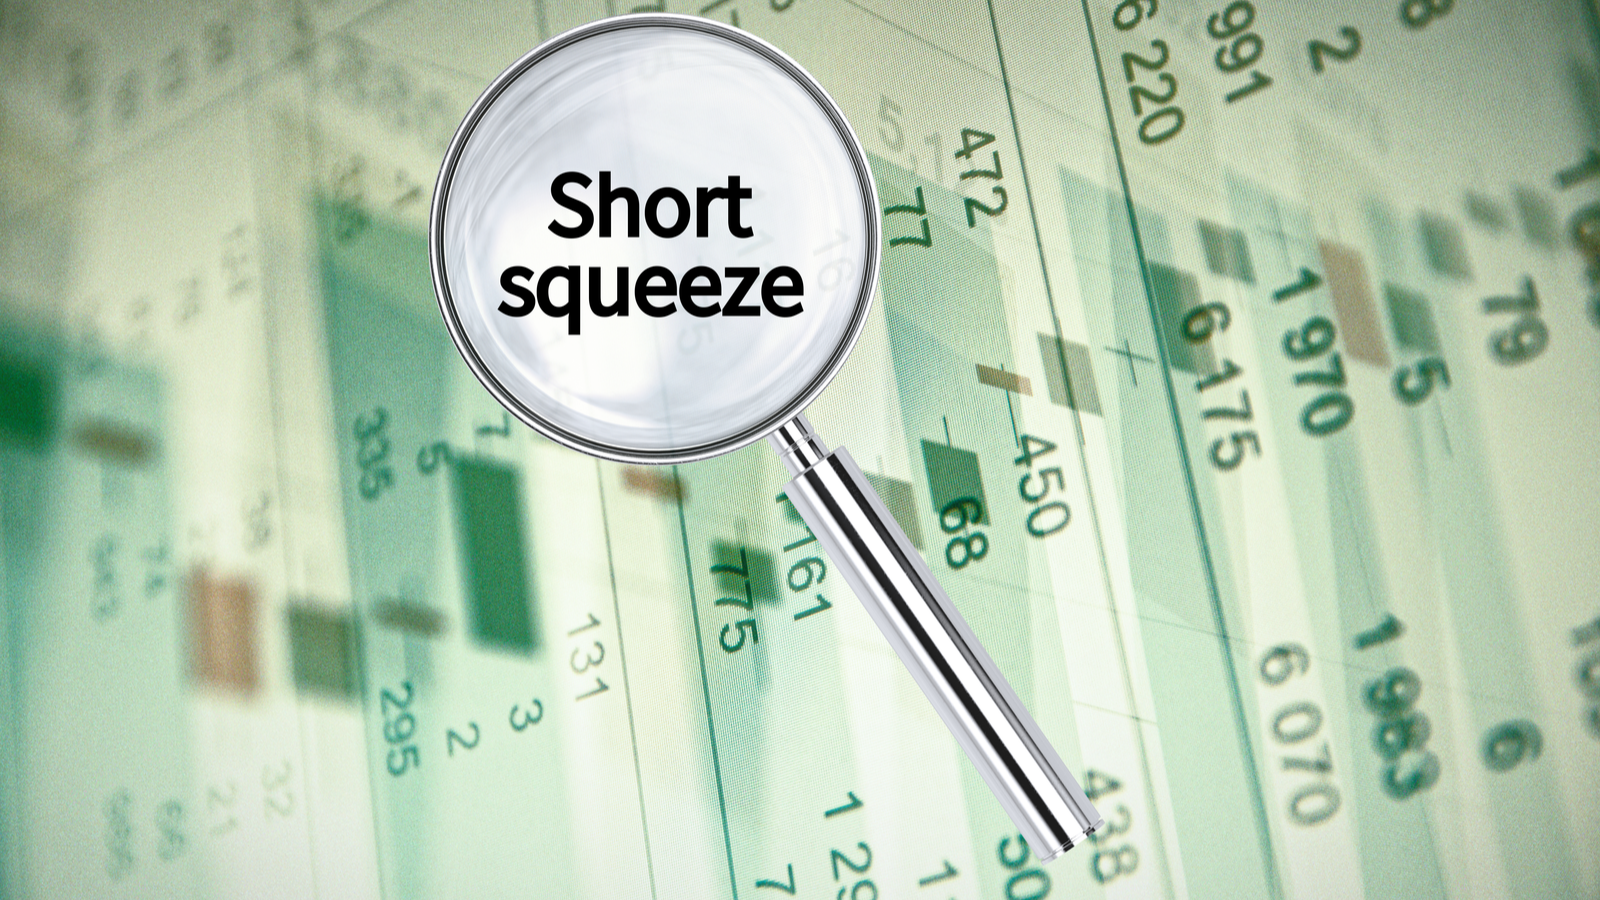 5 Top Squeeze Stocks to Watch This Week | InvestorPlace